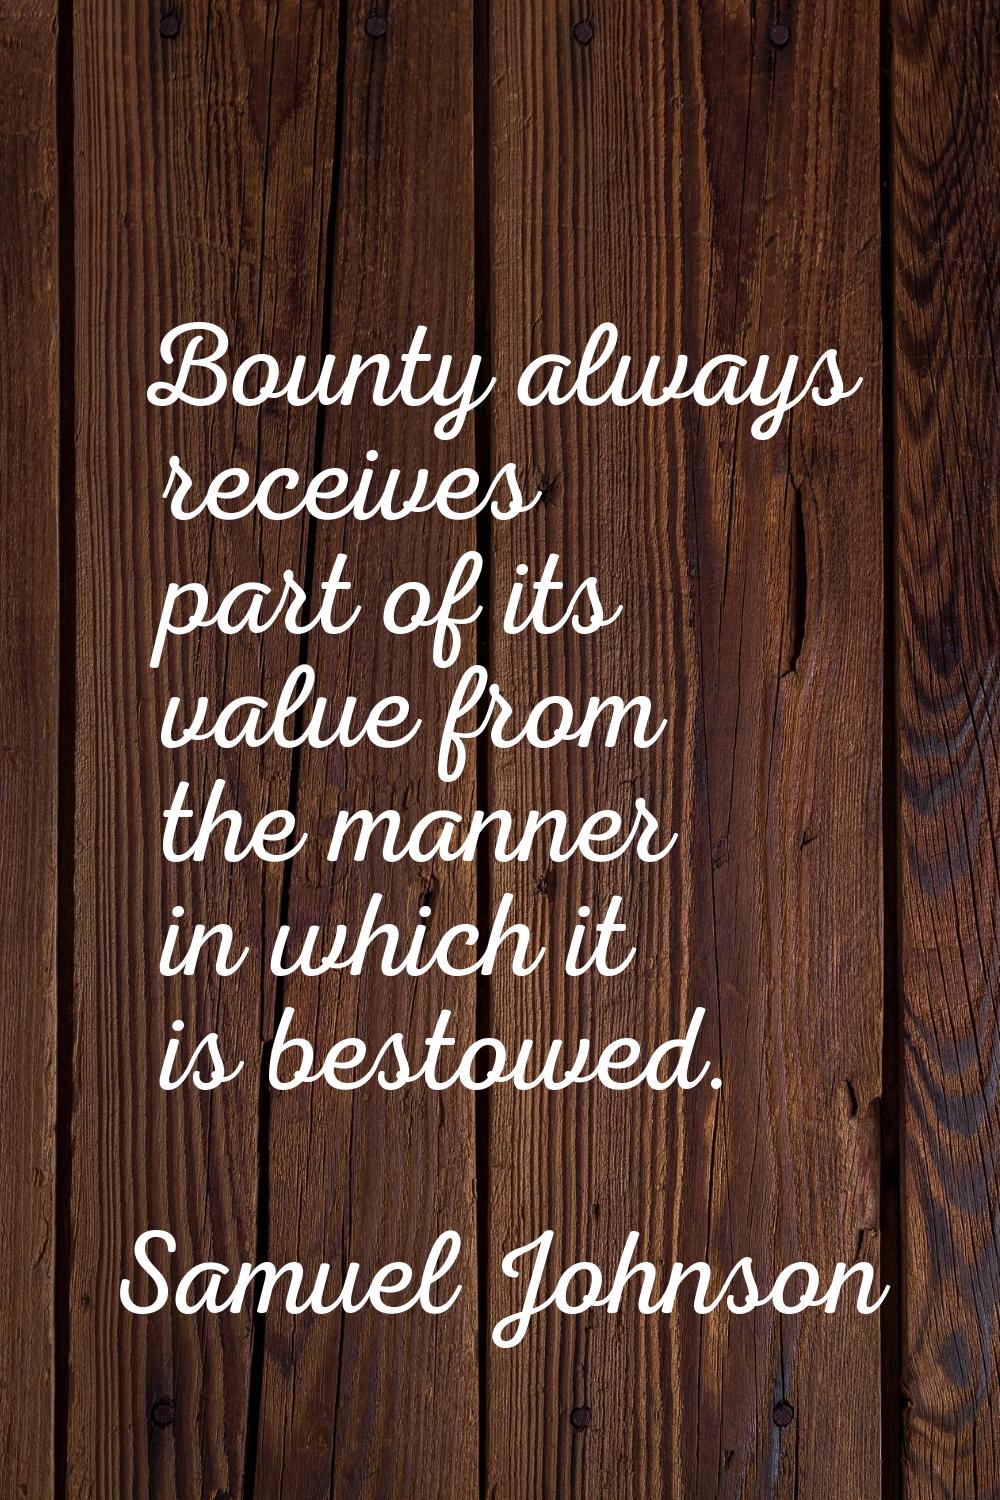 Bounty always receives part of its value from the manner in which it is bestowed.